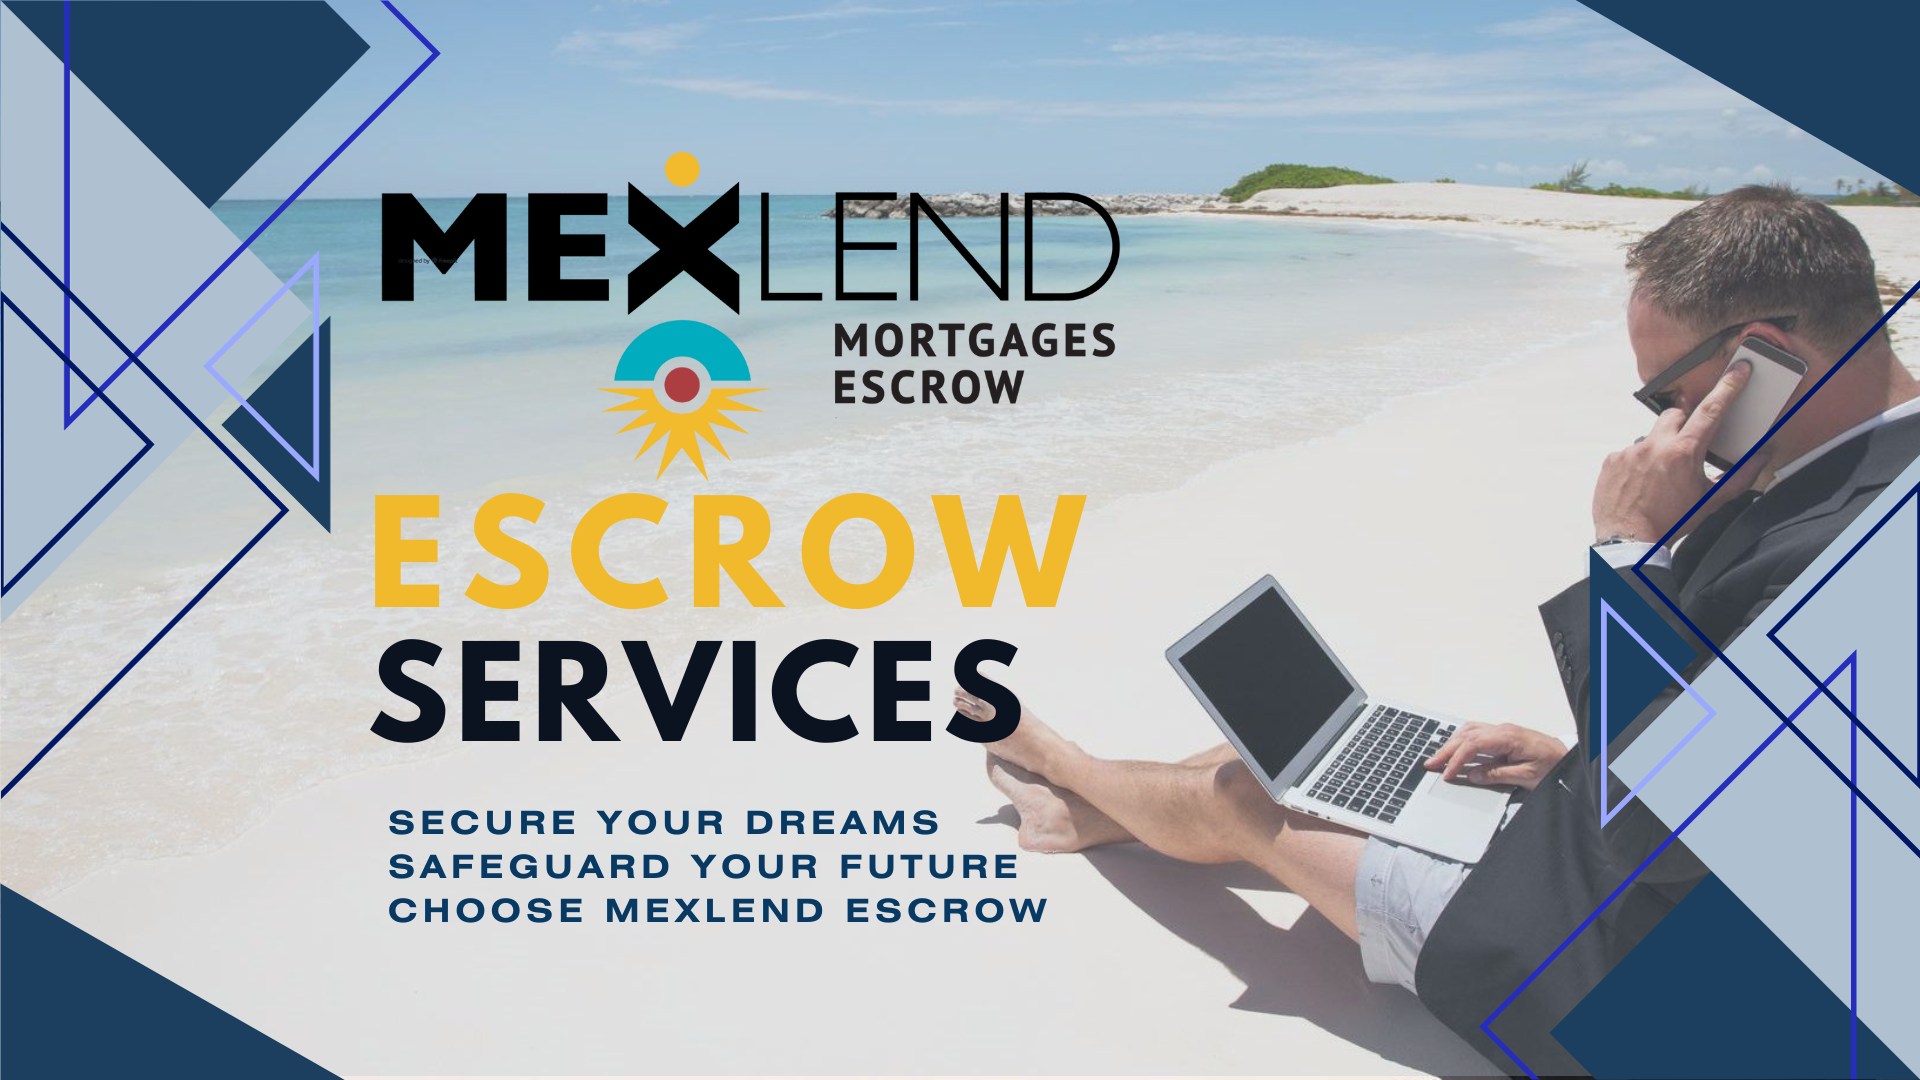 Escrow services in multiple currencies